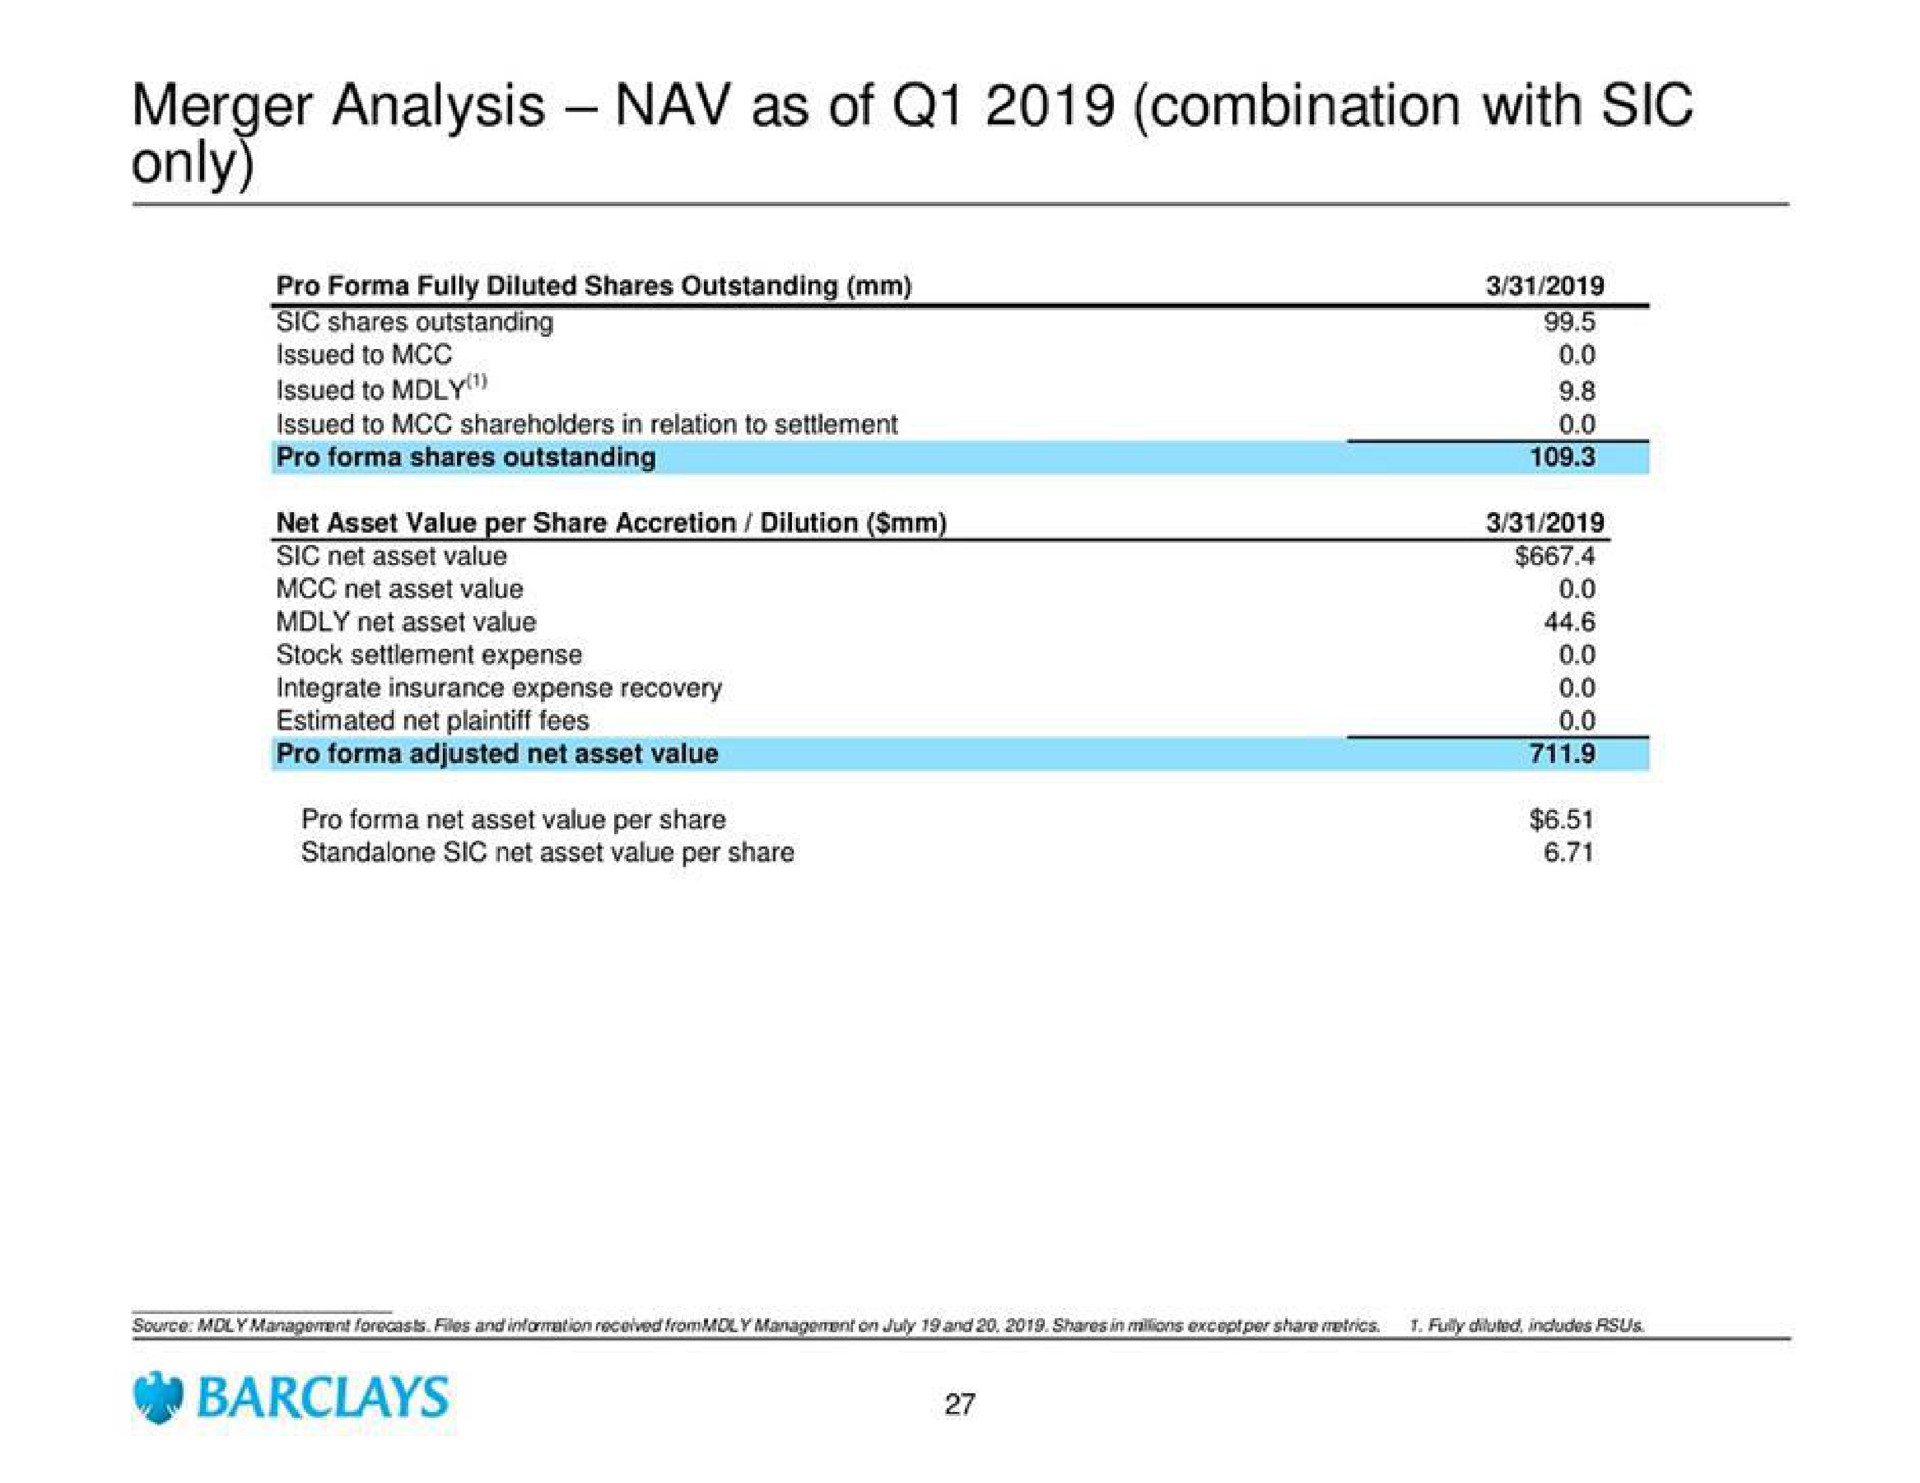 merger analysis as of combination with sic only | Barclays